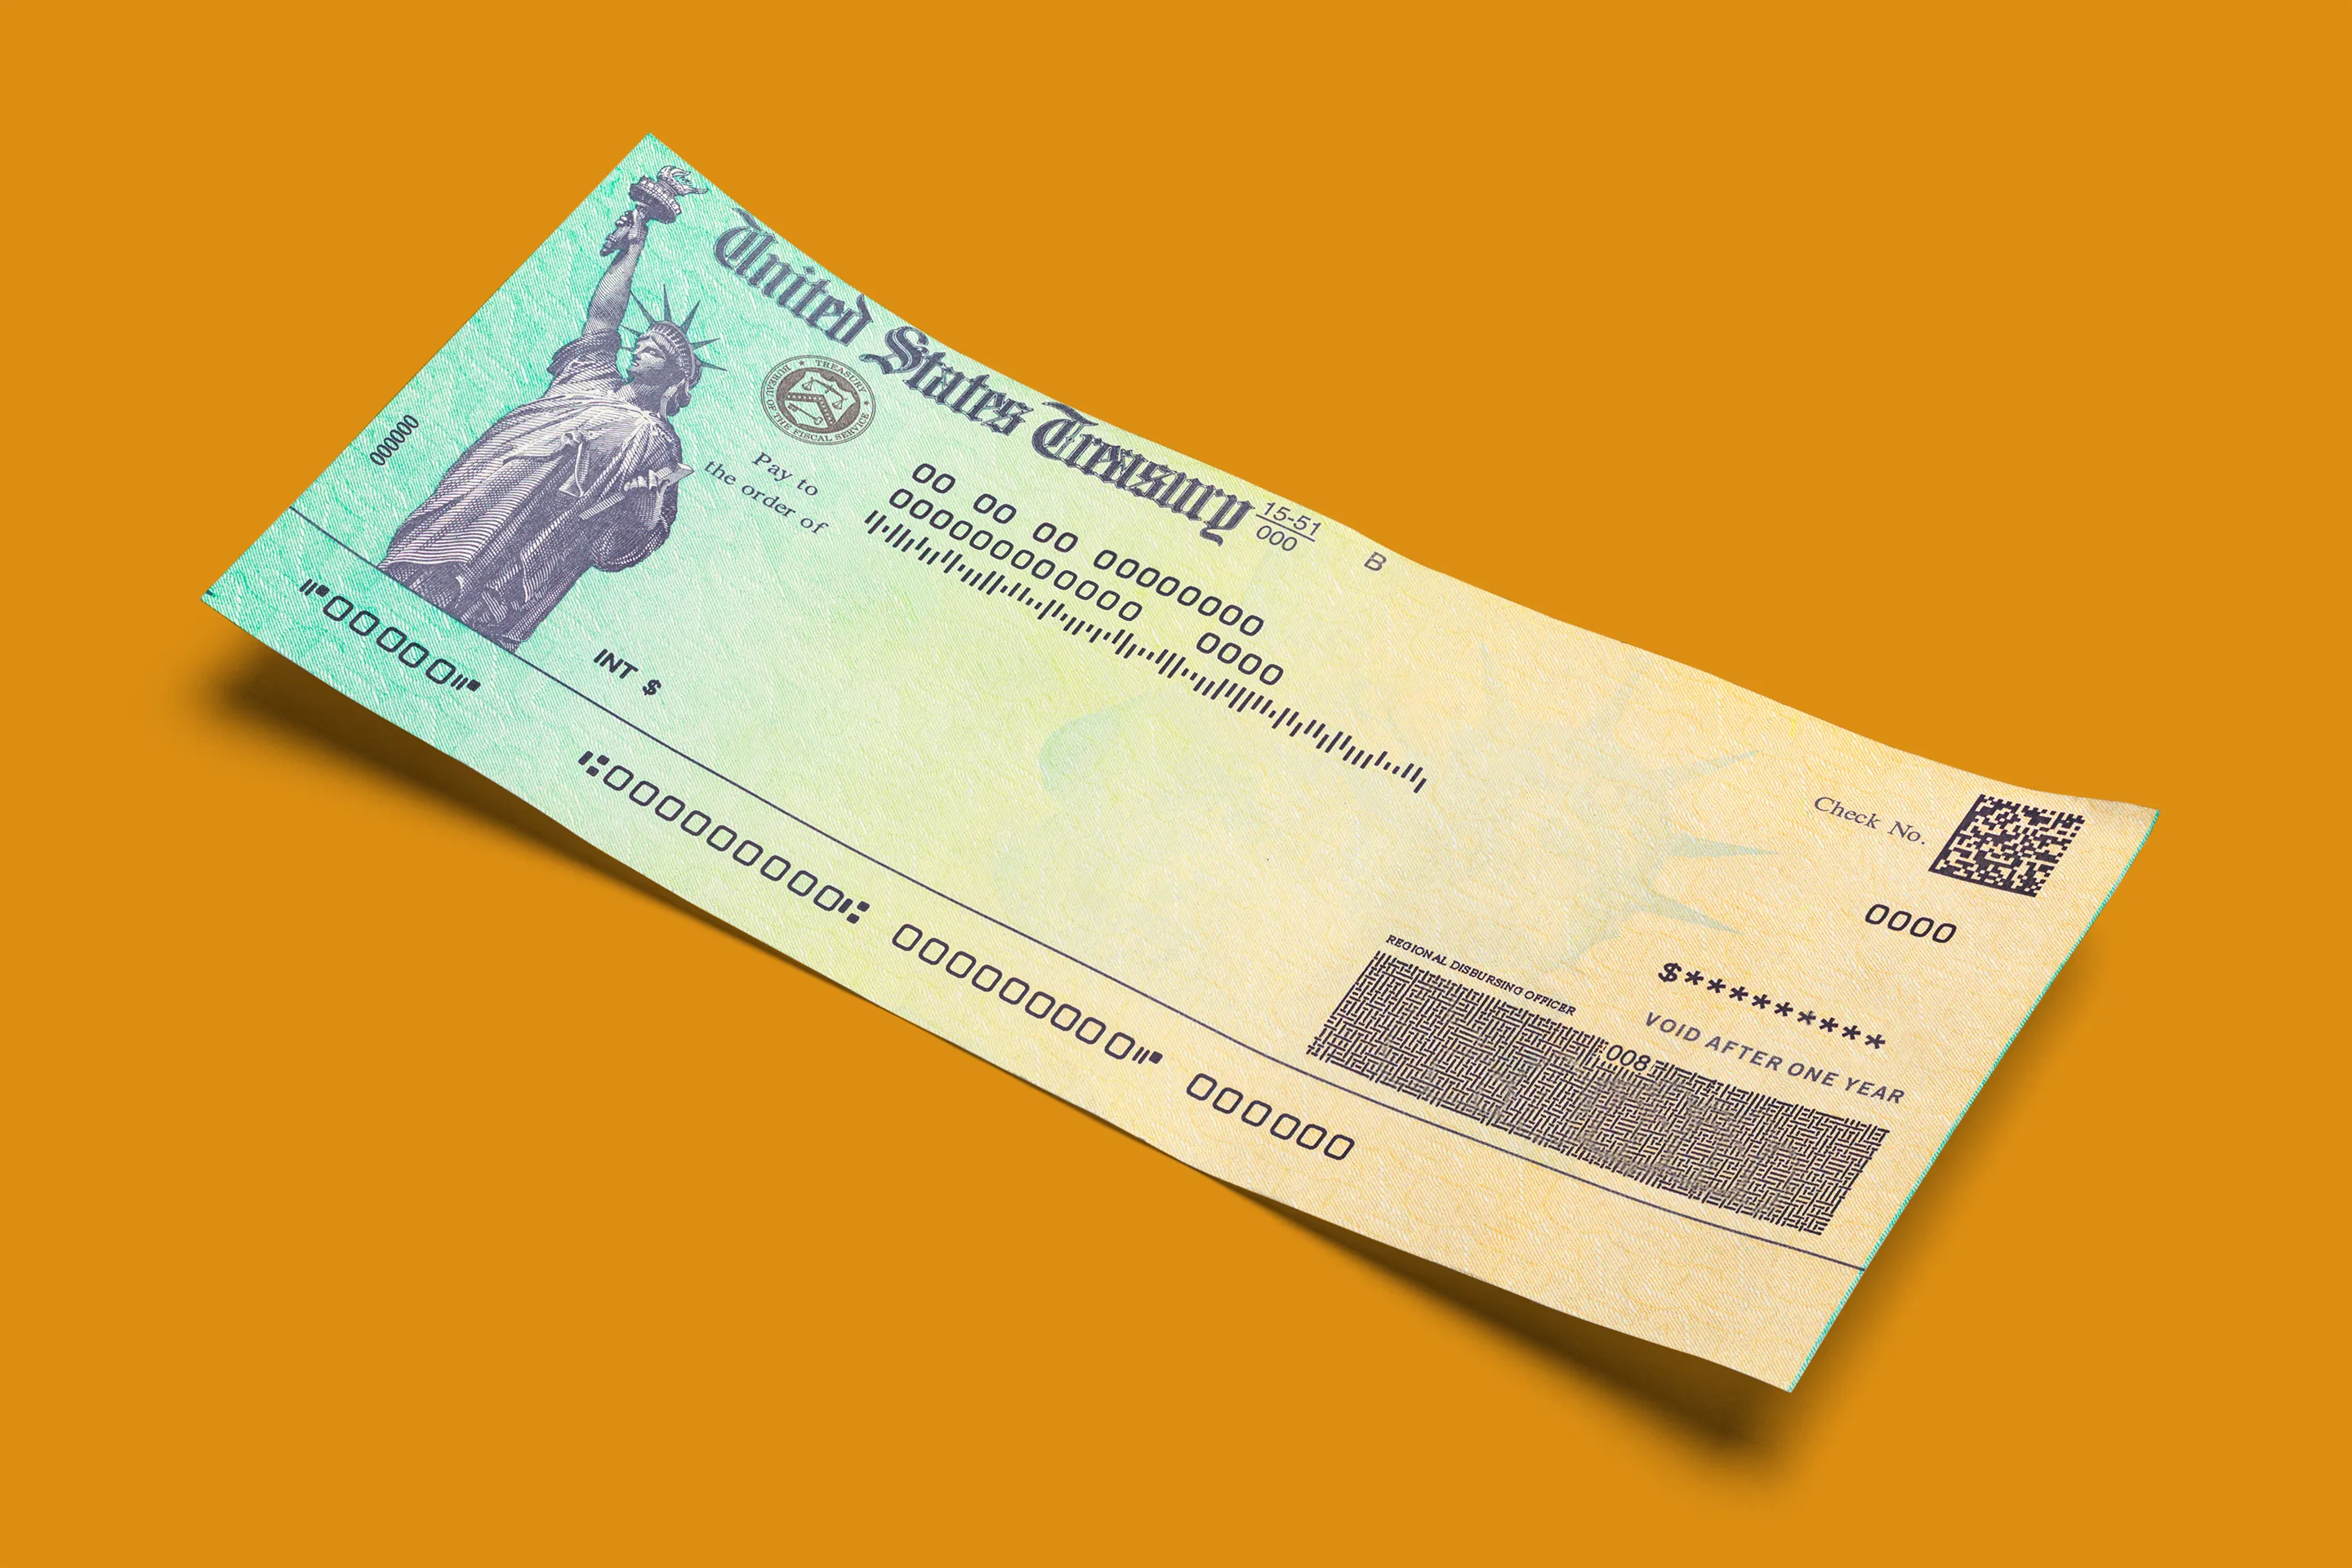 Still Haven't Received a $1,200 Stimulus Check? You Must Register This Week to Get the Money in 2020